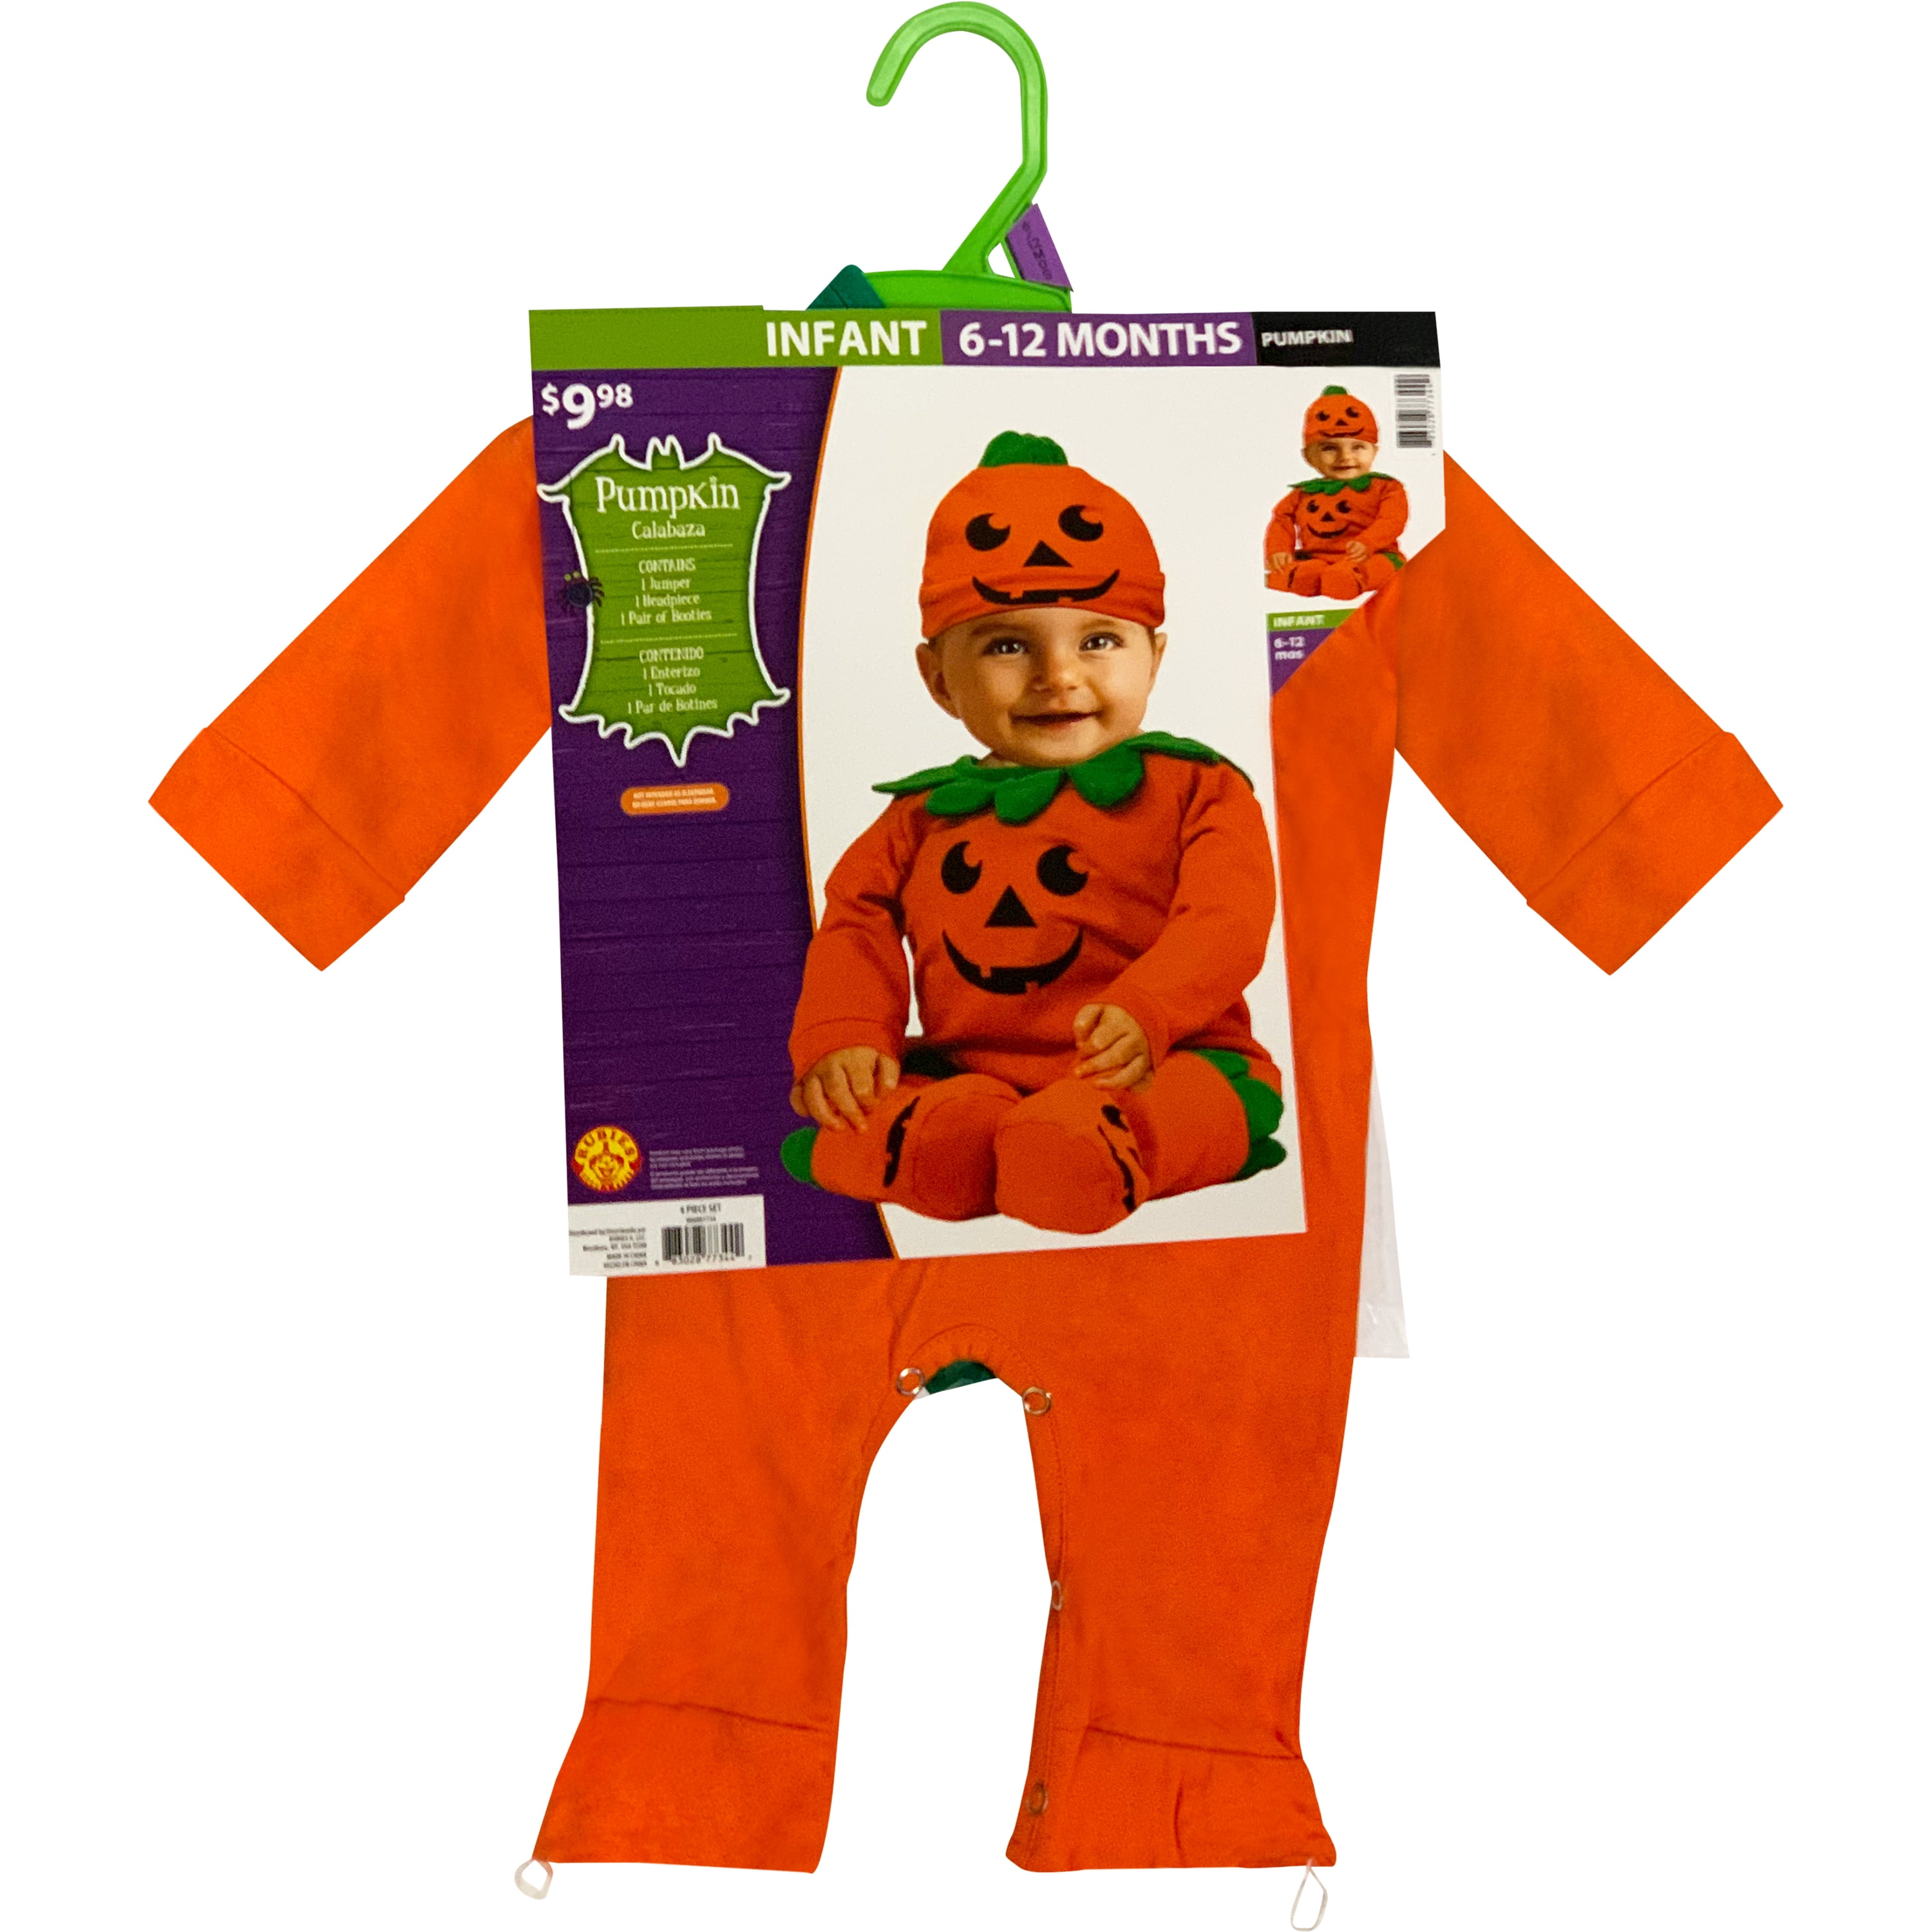 Details about   Rubies Infant Costume Dress up Pumpkin 6 to 12 Months  New in Package 